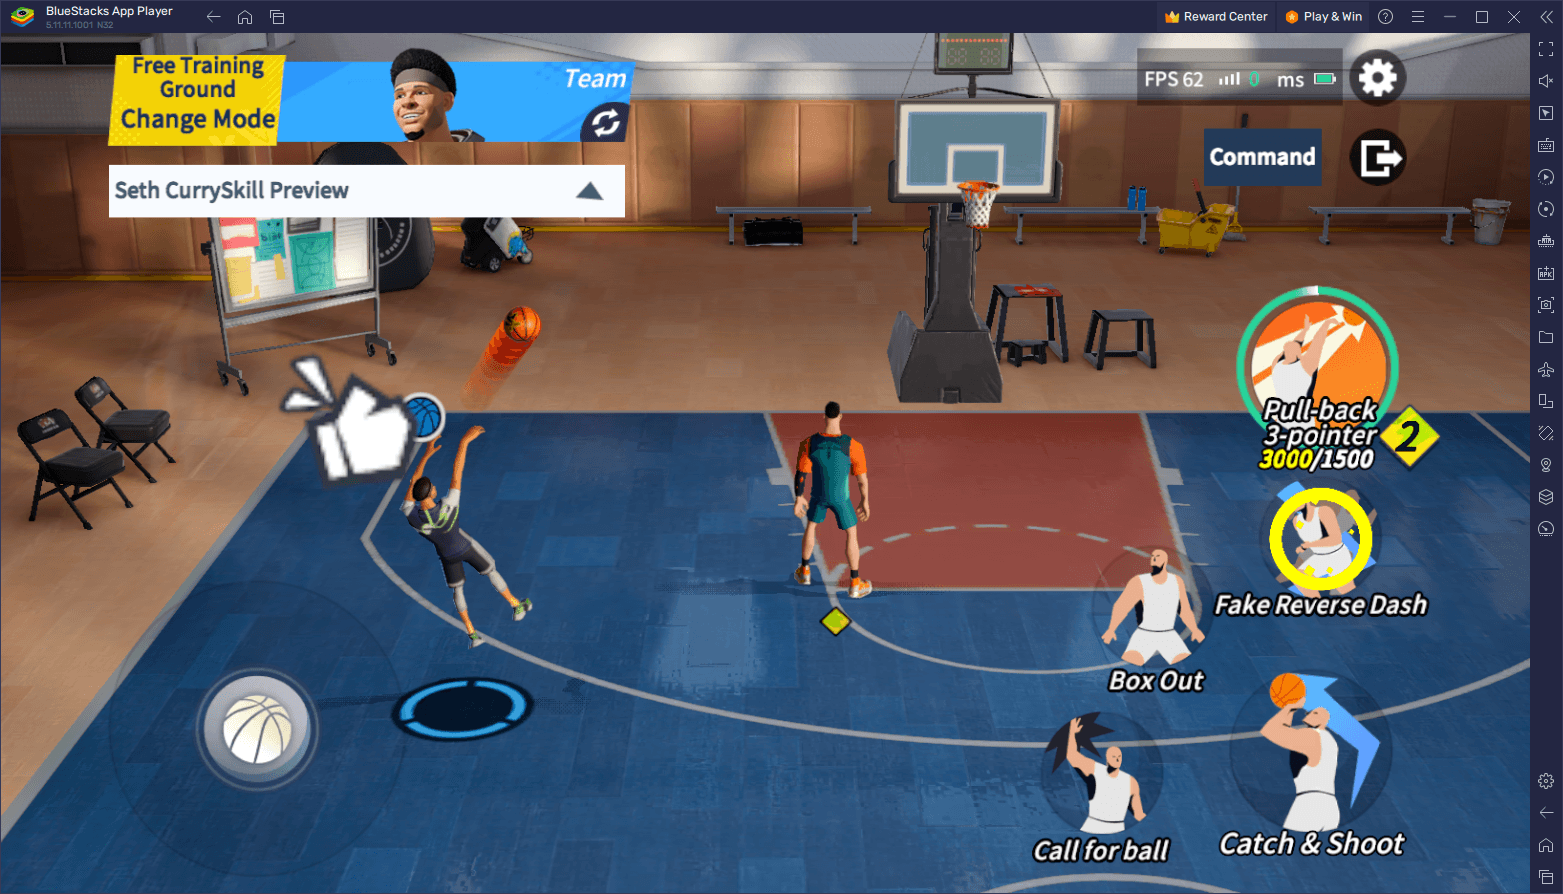 How to Play Dunk City Dynasty on PC With BlueStacks